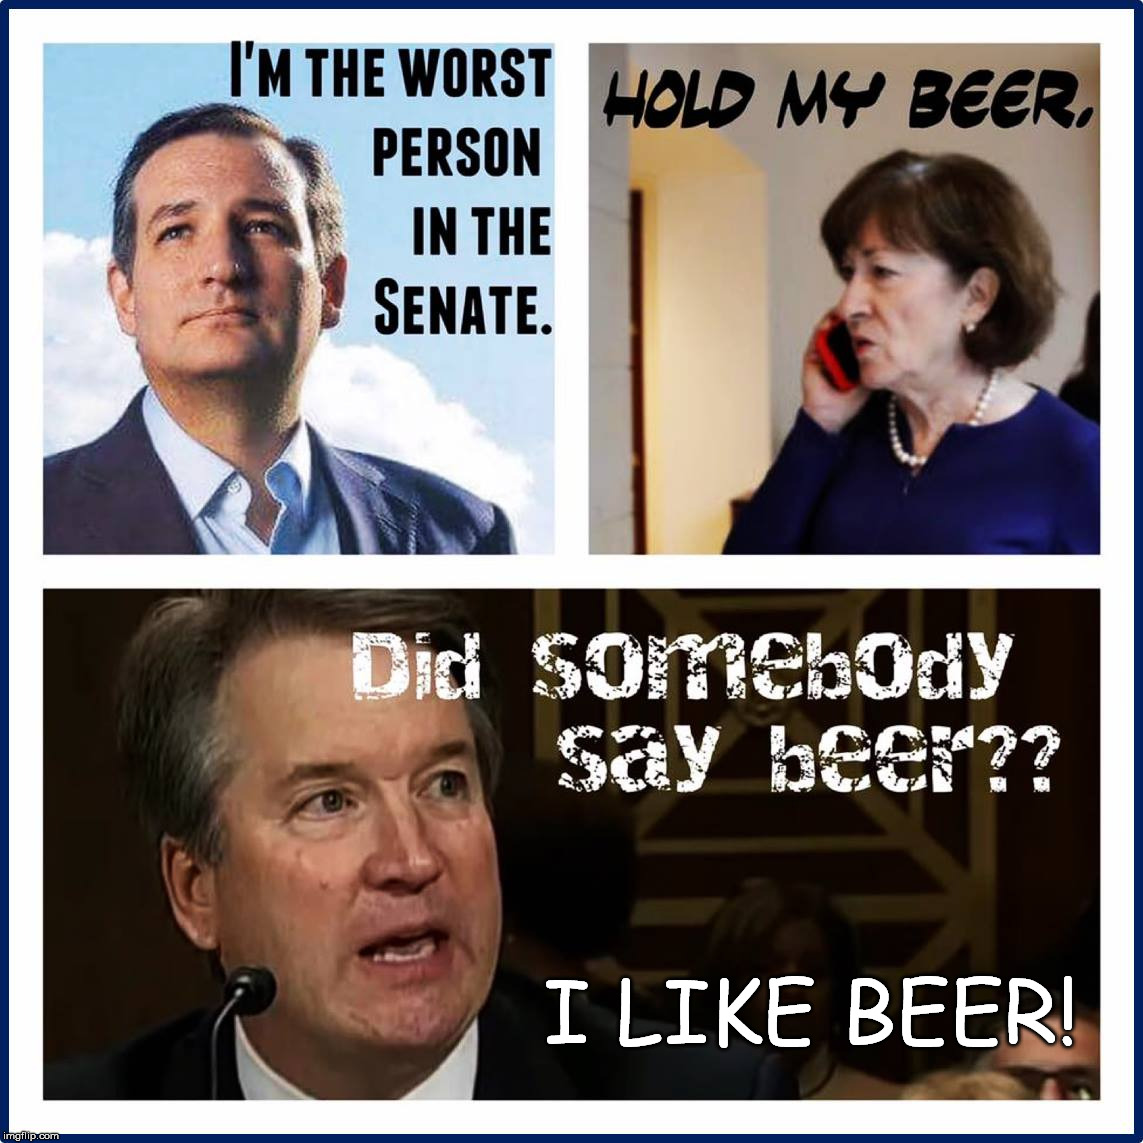 Im the worse person. Hold my beer. | I LIKE BEER! | image tagged in kavanaugh,beer,senate,worst person | made w/ Imgflip meme maker